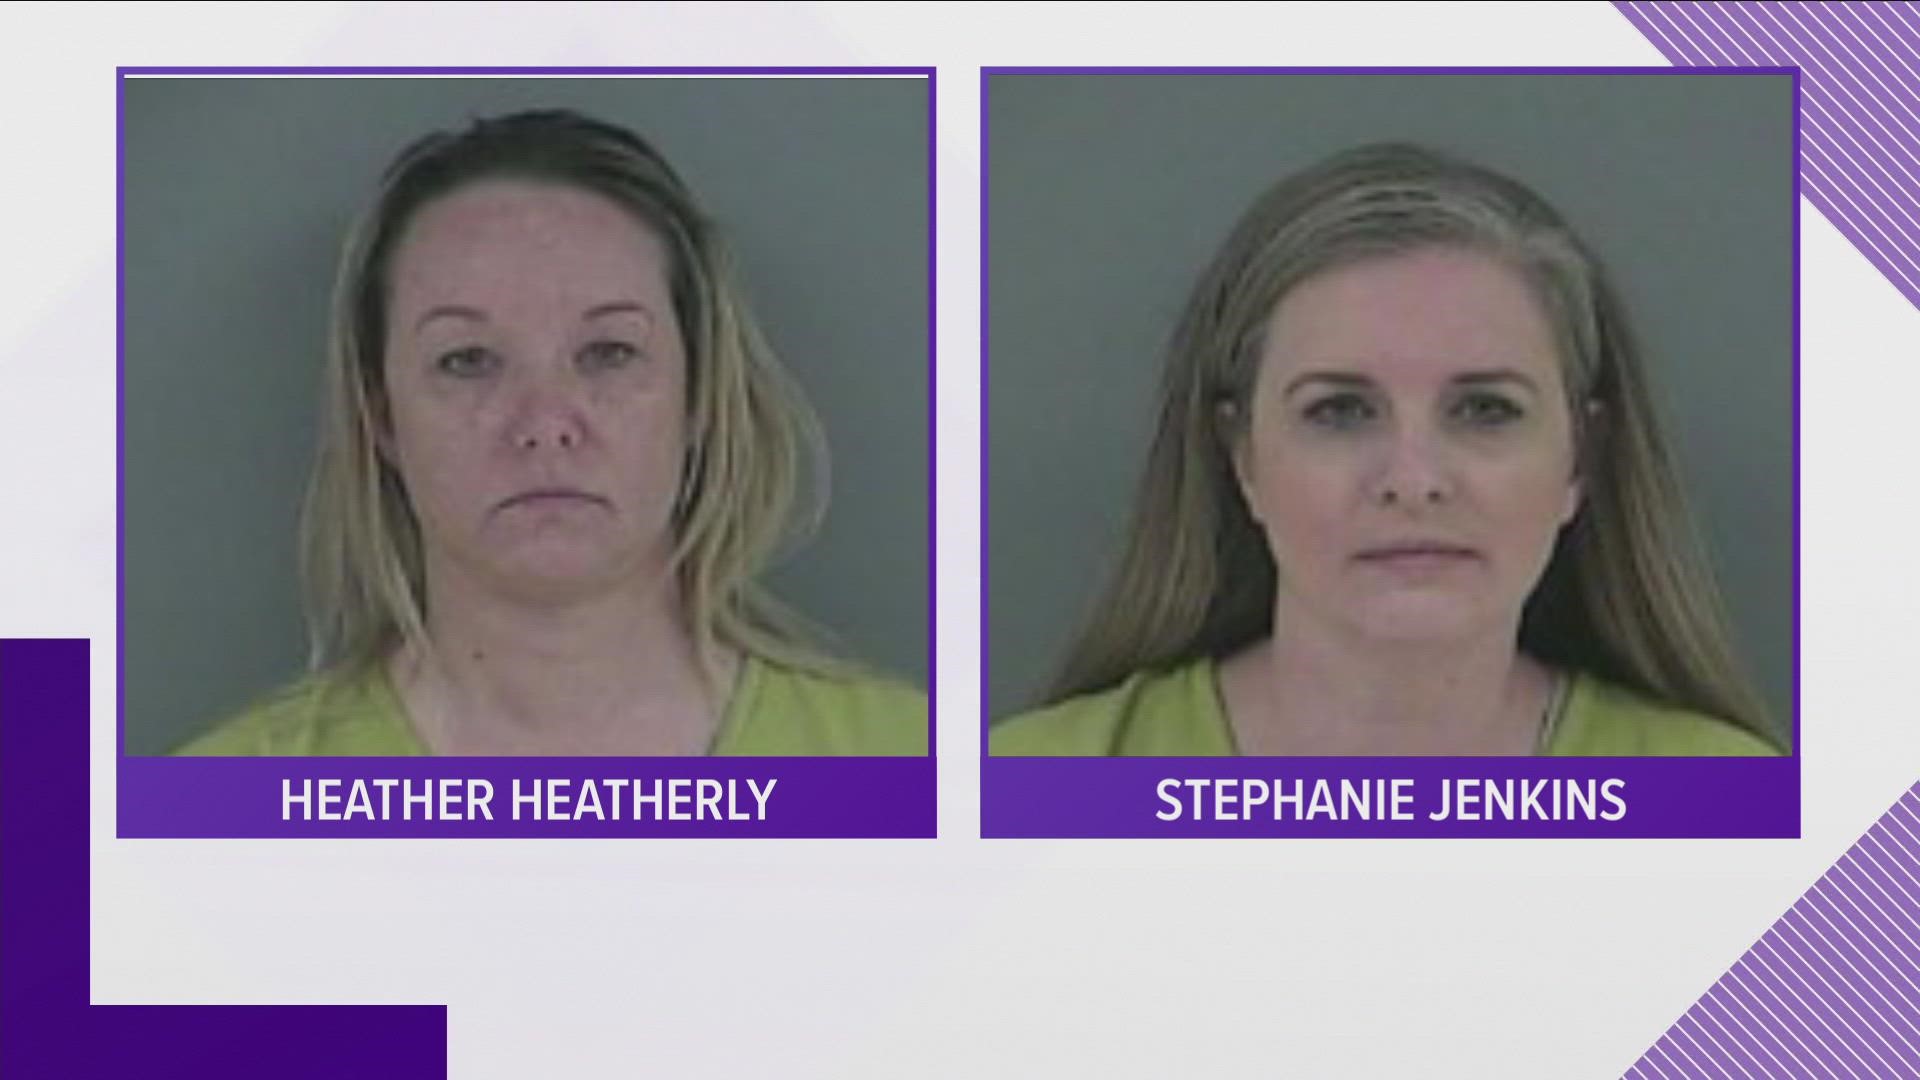 Two former Anderson County administrative assistants were arrested on theft charges of more than $10,000.